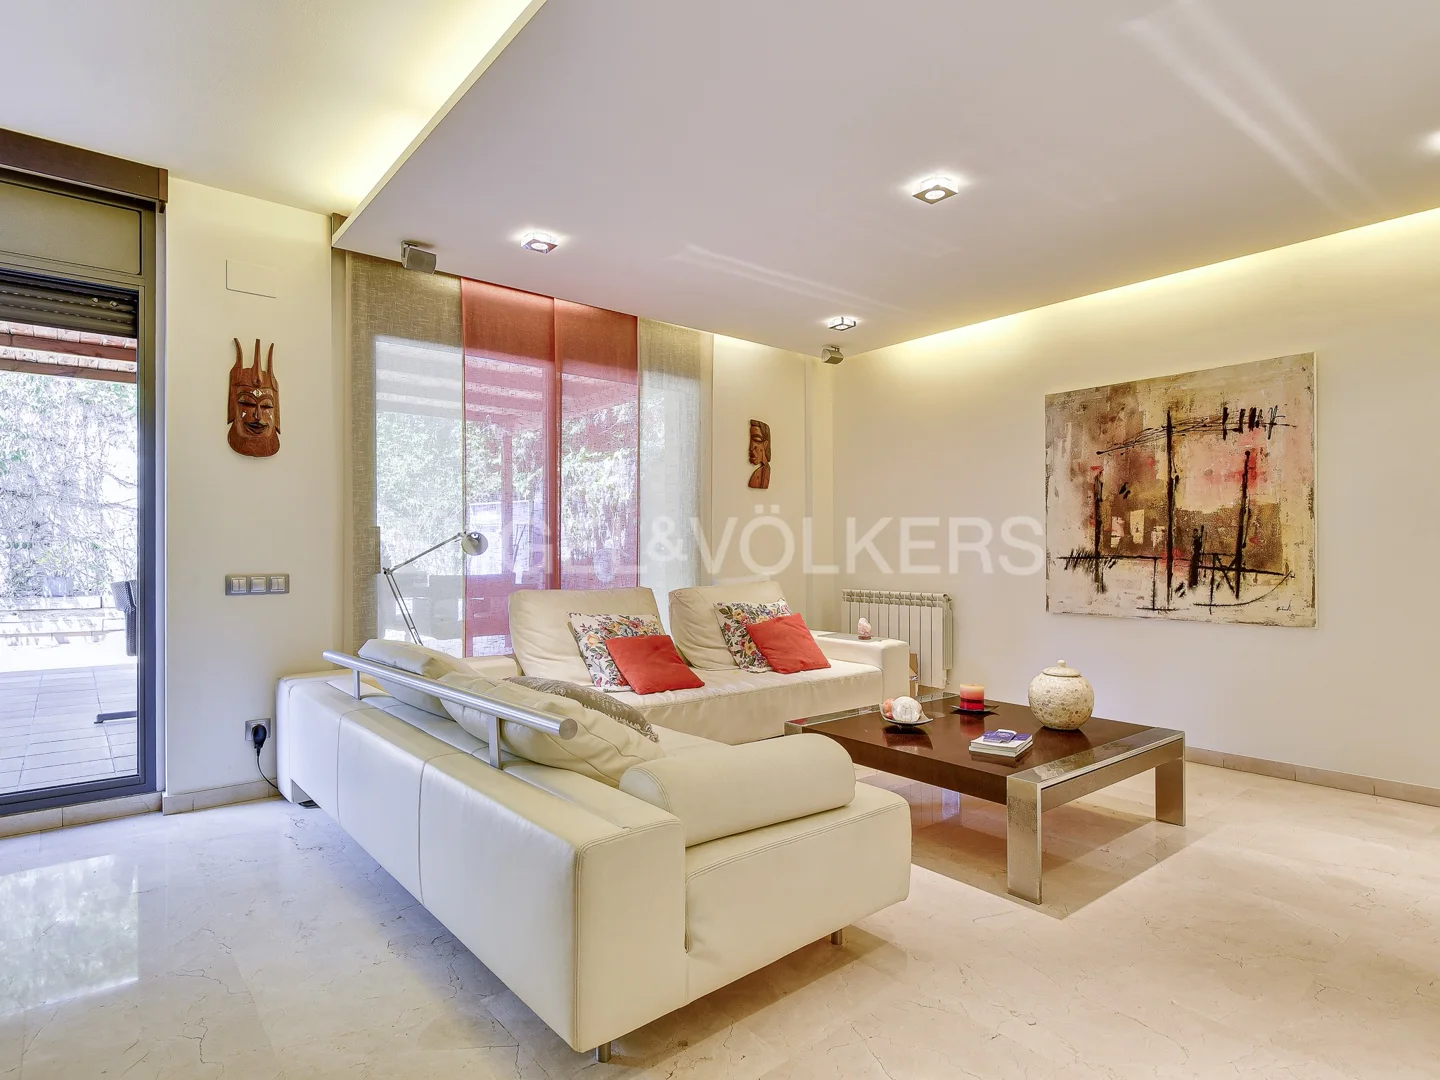 Fantastic semi-detached house in the center of Alella